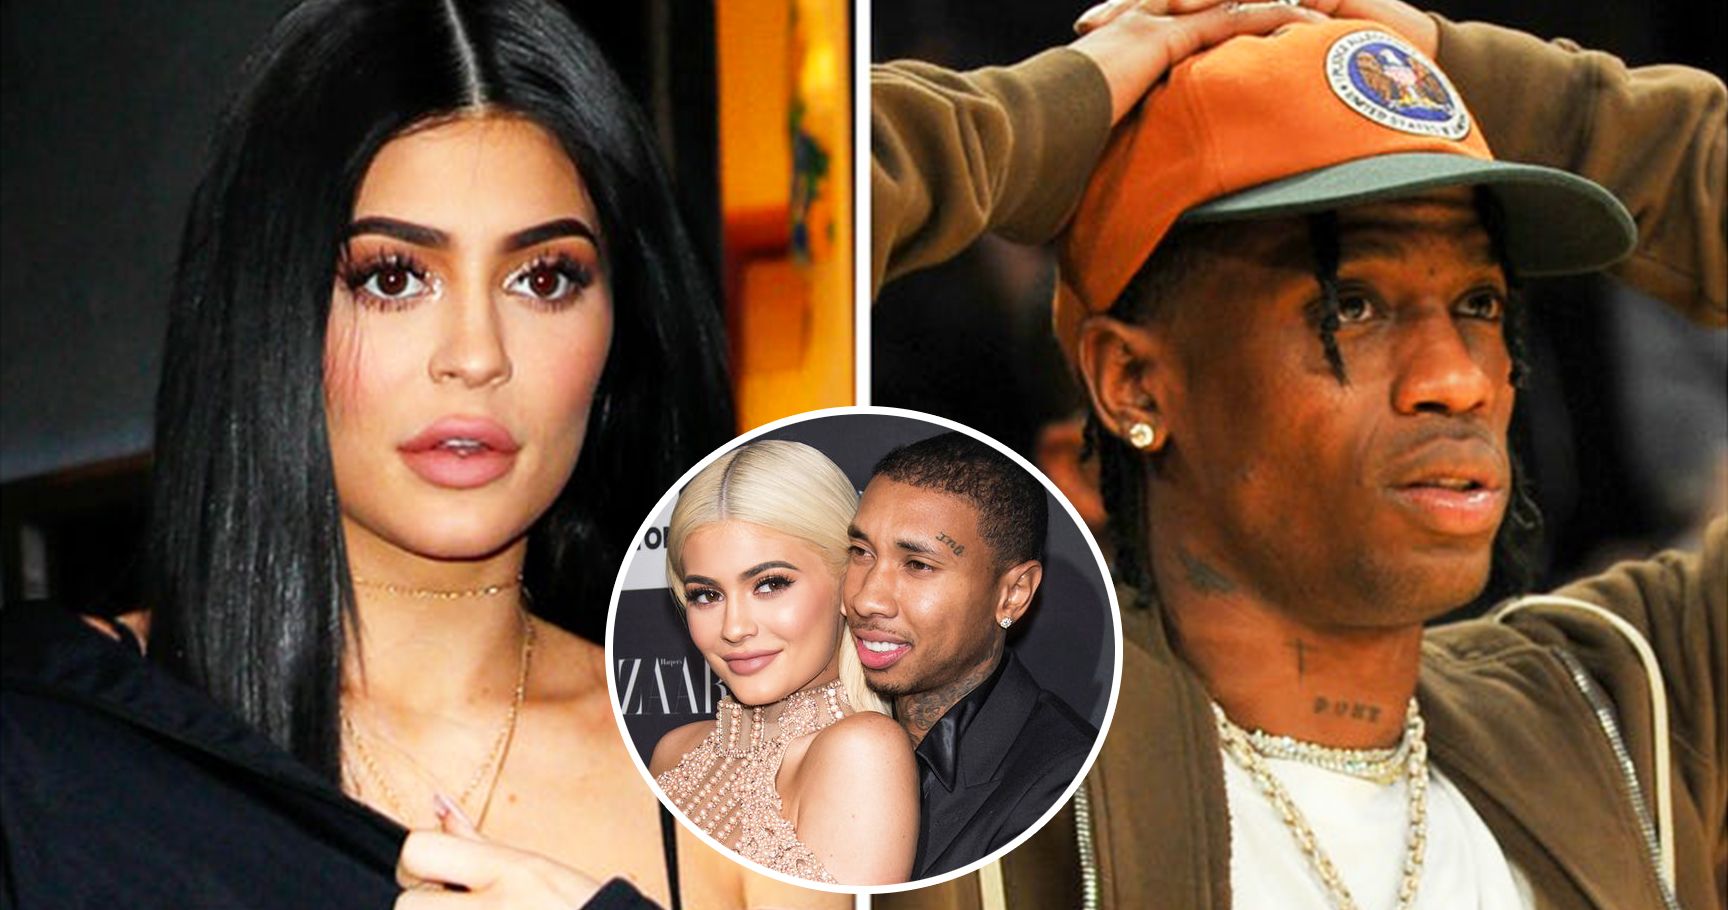 15 Reasons Kylie Jenner Will Never Say I Do To Travis Scott